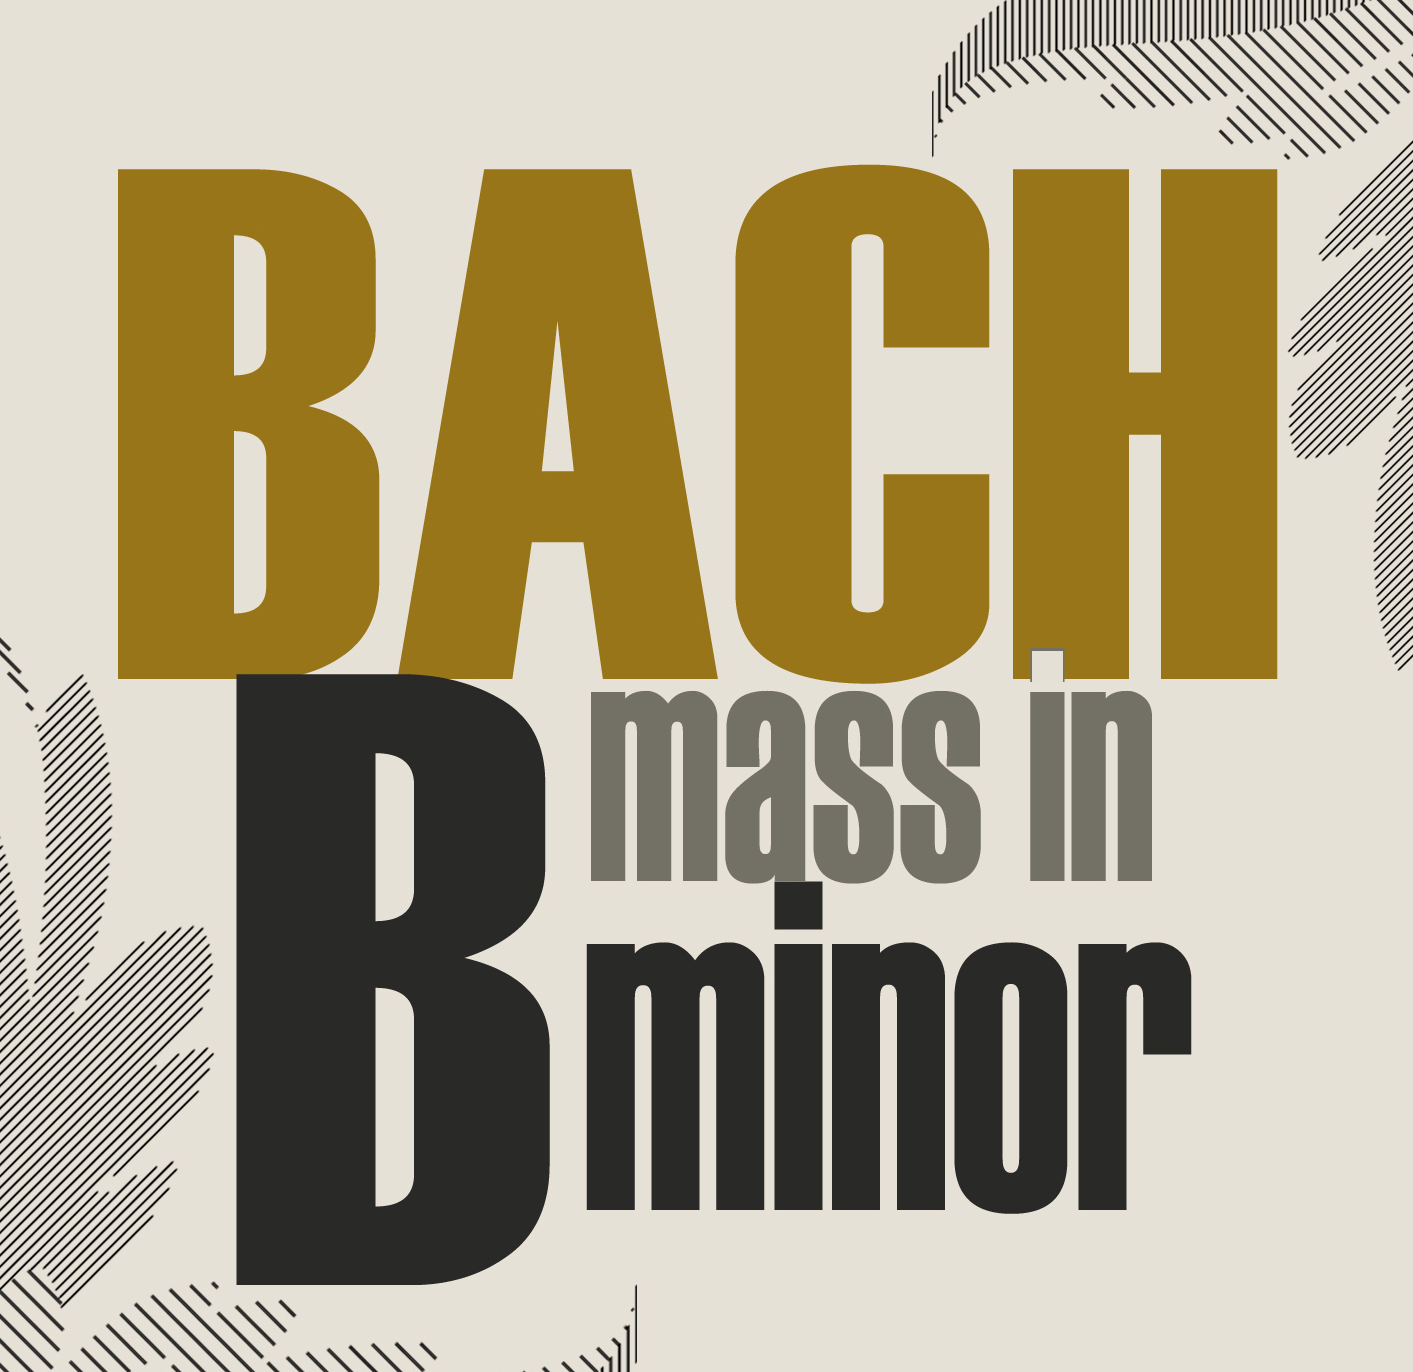 Bach mass in B minor - University of Essex choir poster graphic